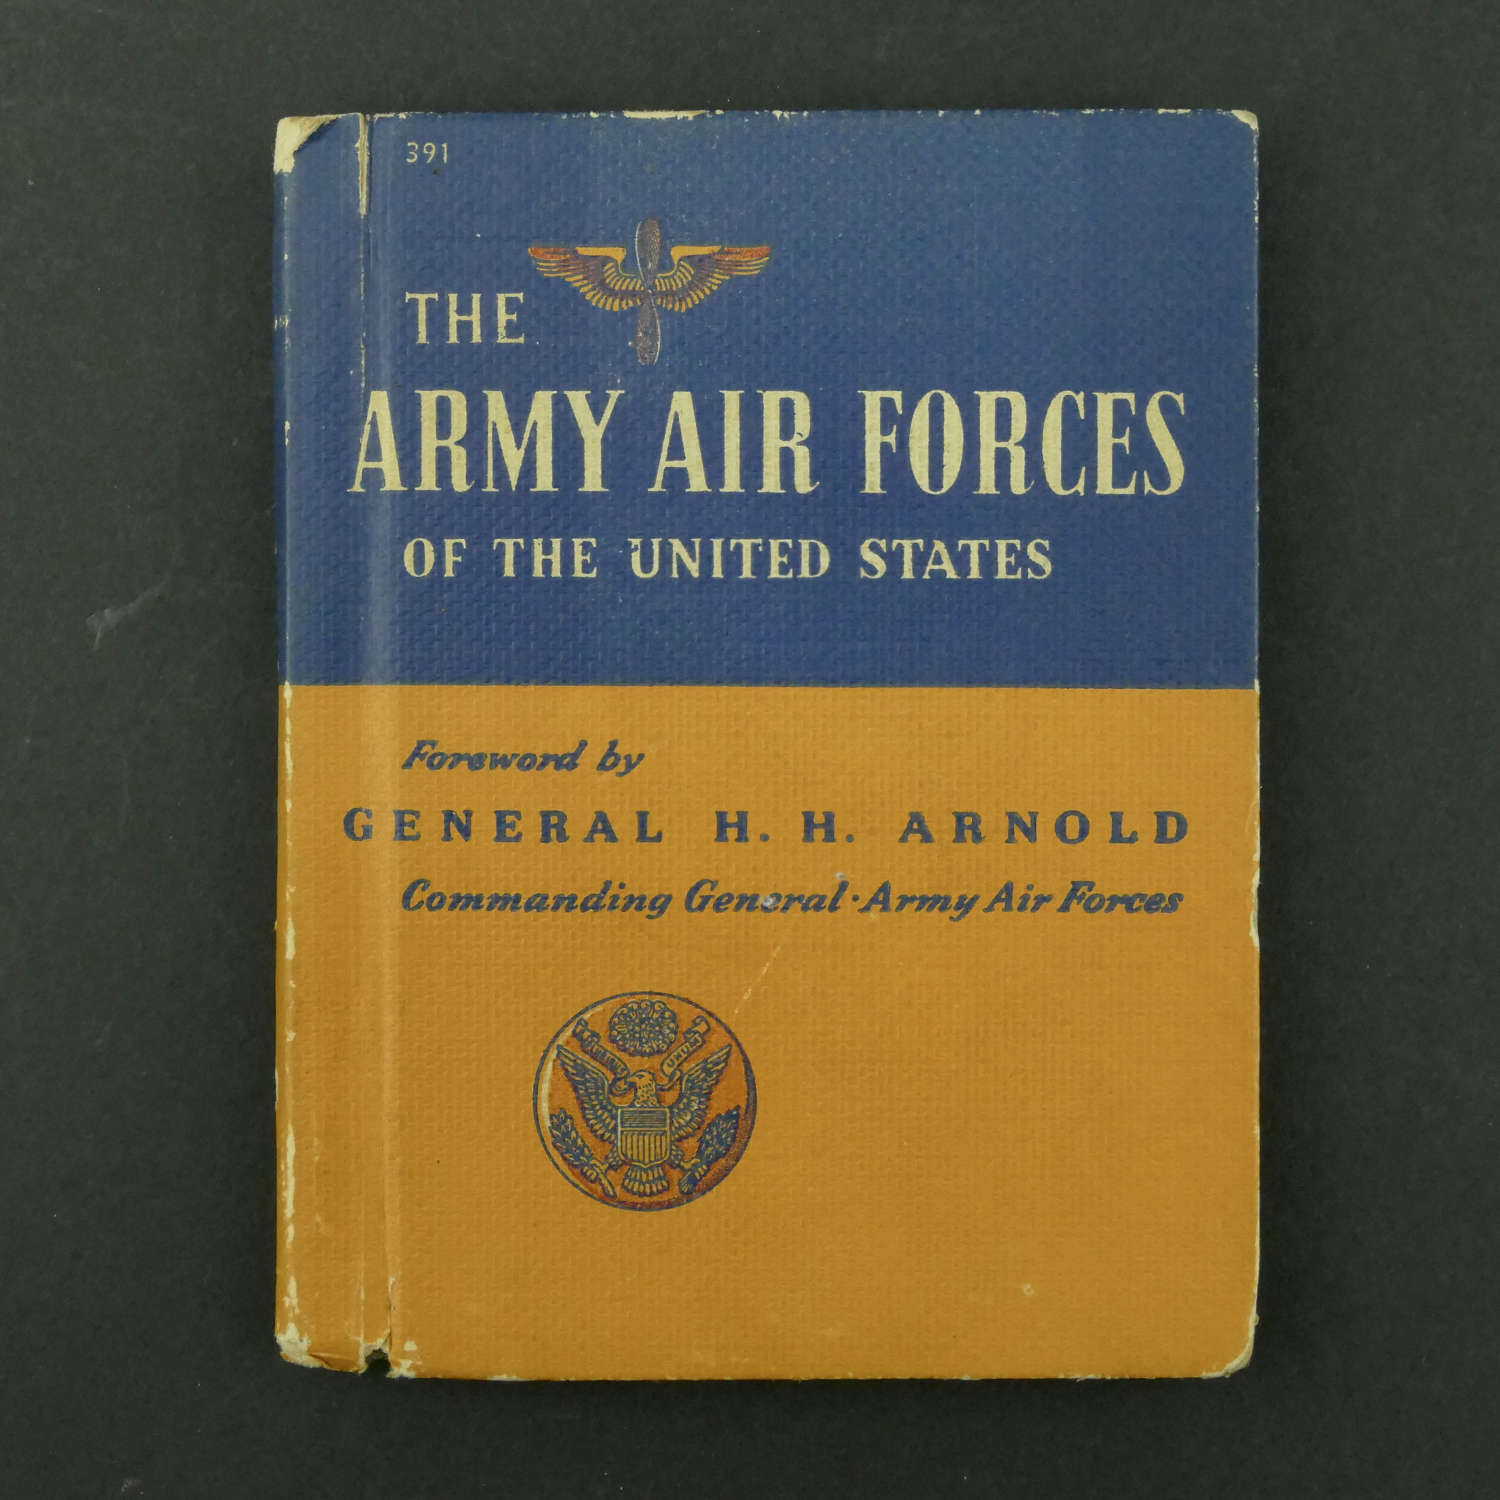 The Army Air Forces Of The United States, 1943